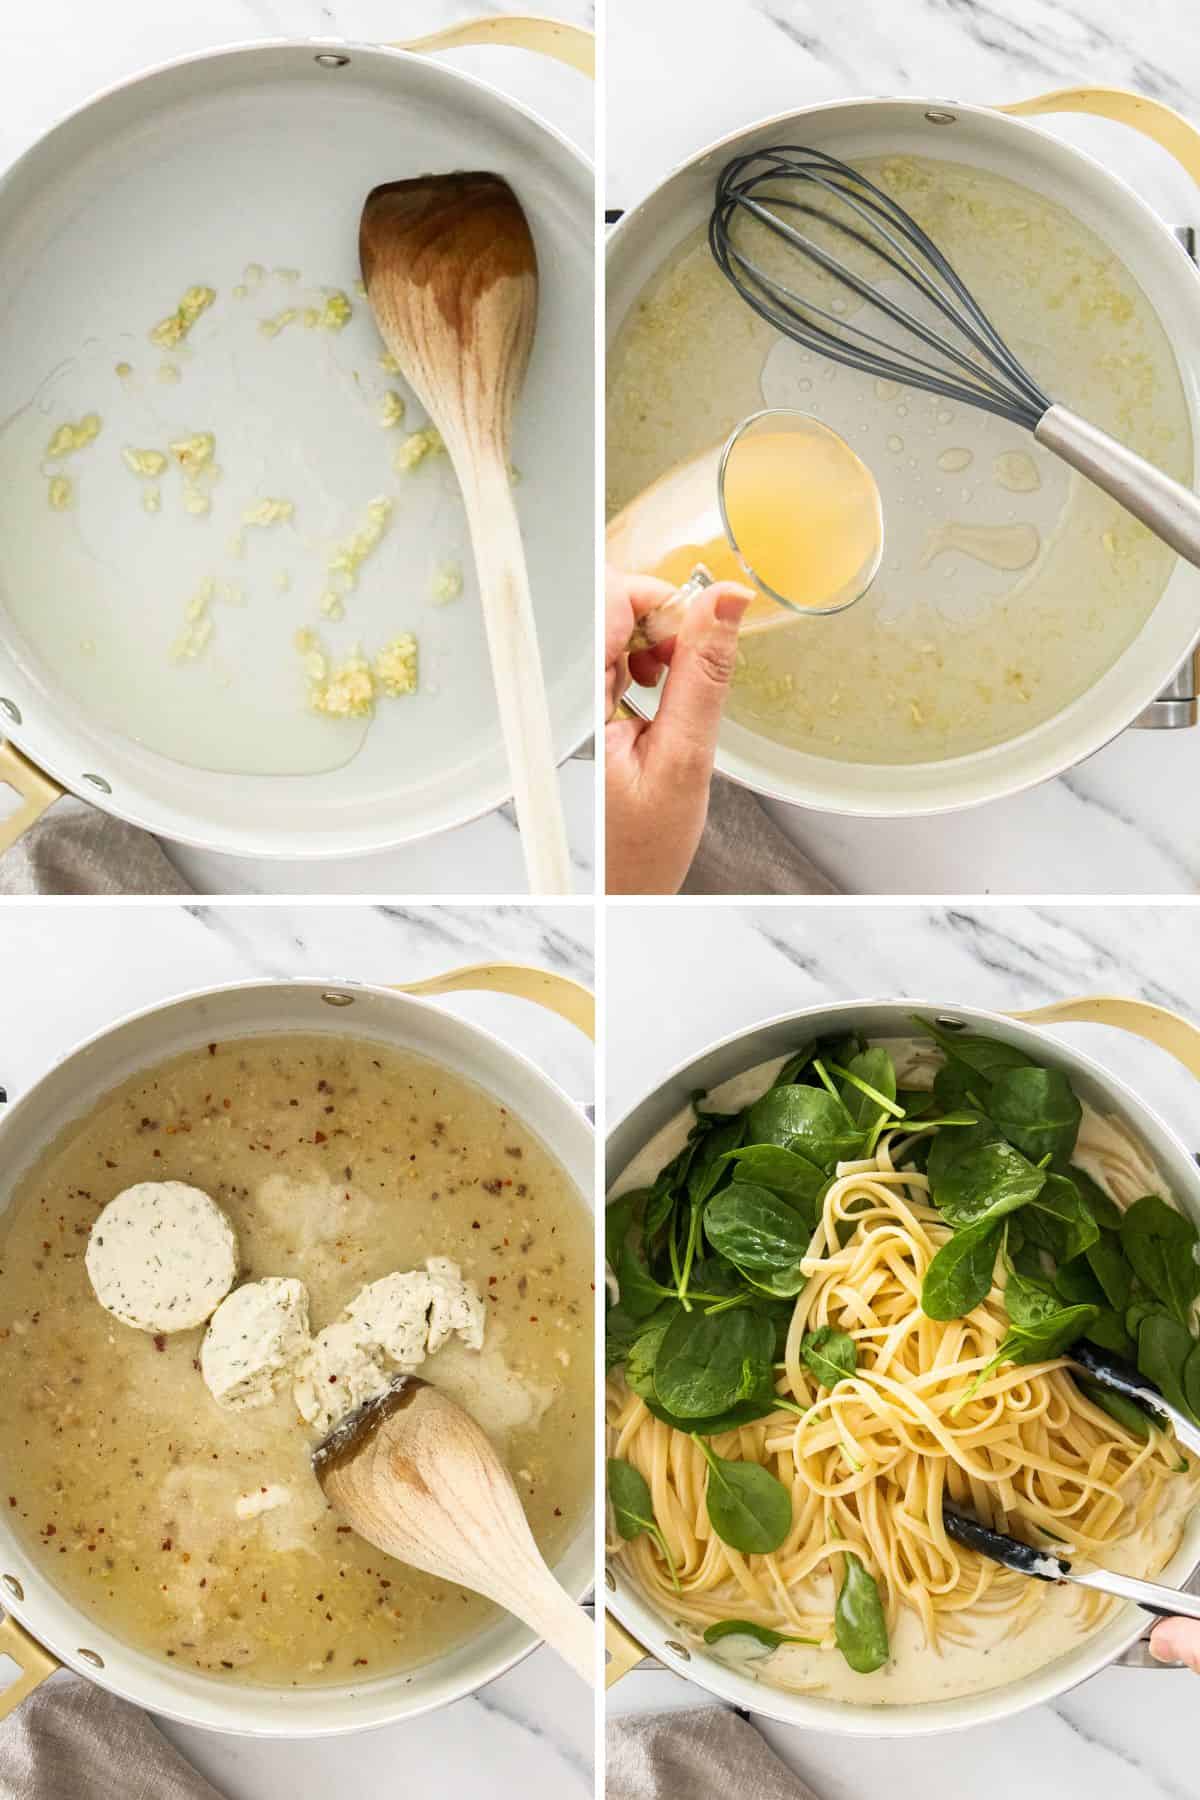 4 photos showing how to make a pasta dish with Boursin cheese.